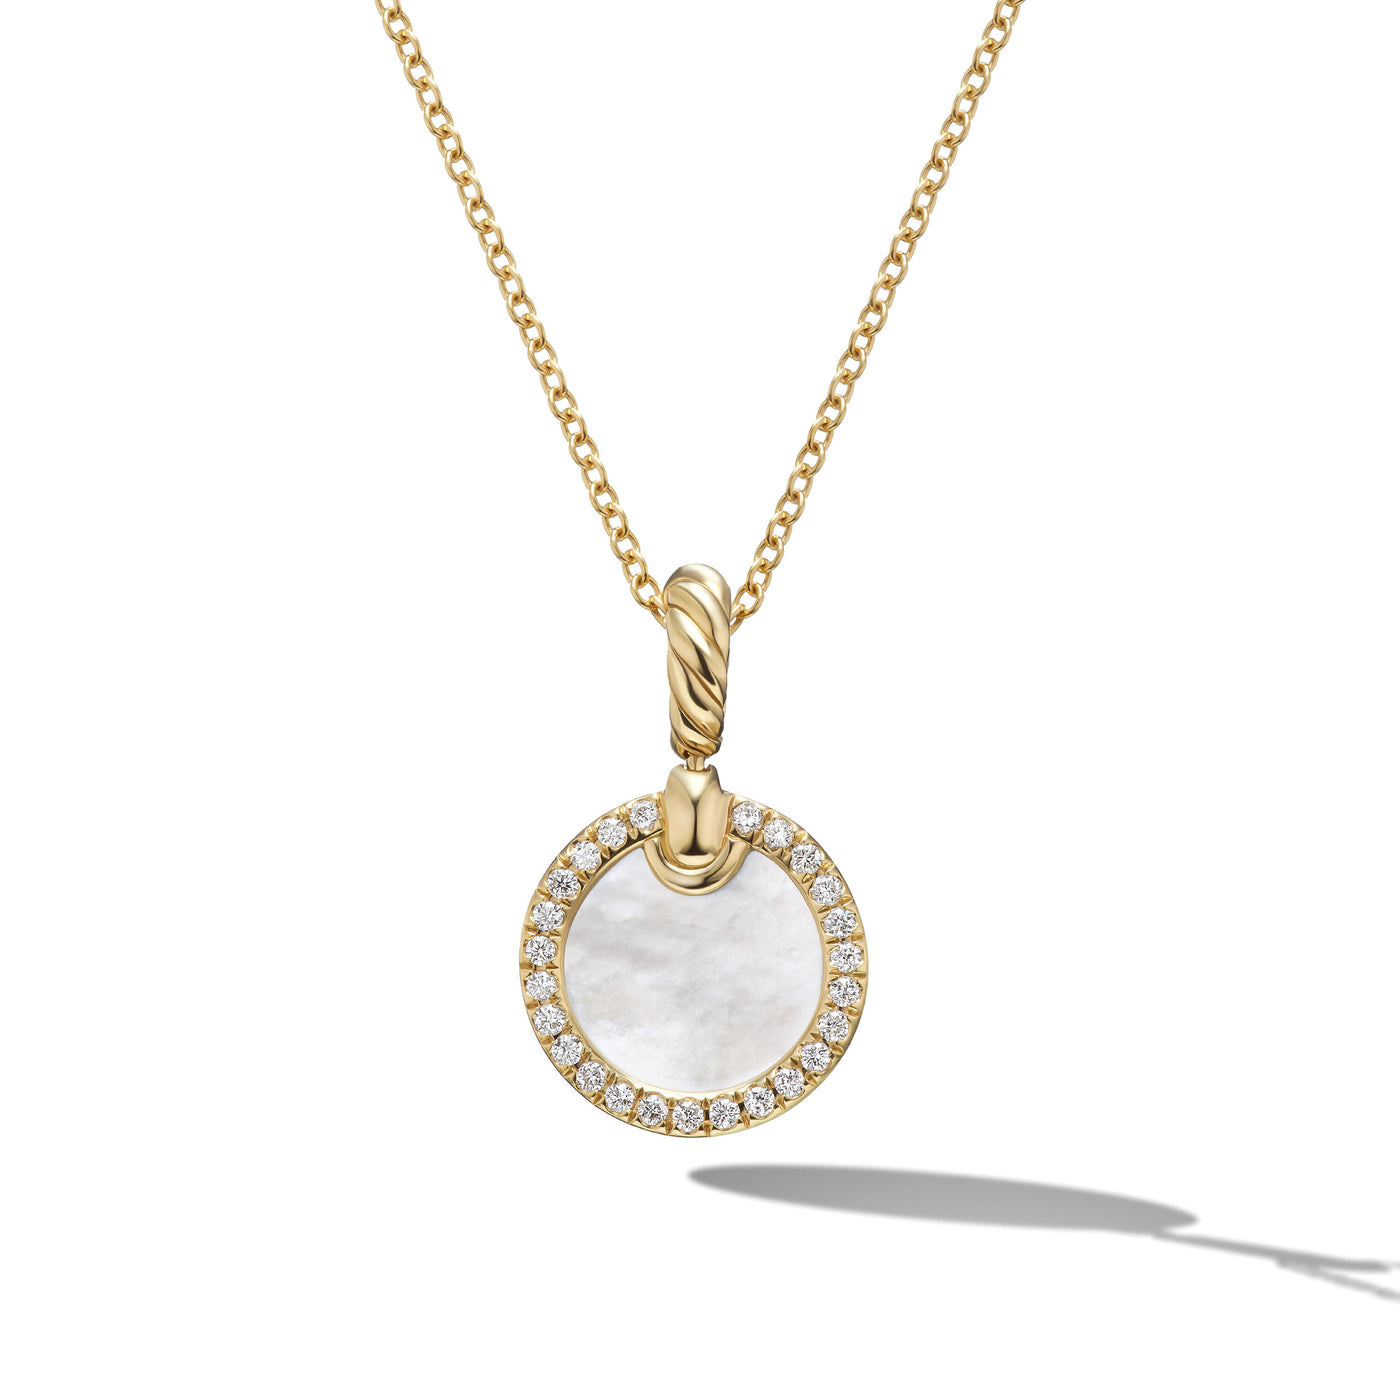 Petite DY Elements® Pendant Necklace in 18K Yellow Gold with Mother of Pearl and Diamonds\, 17.8mm